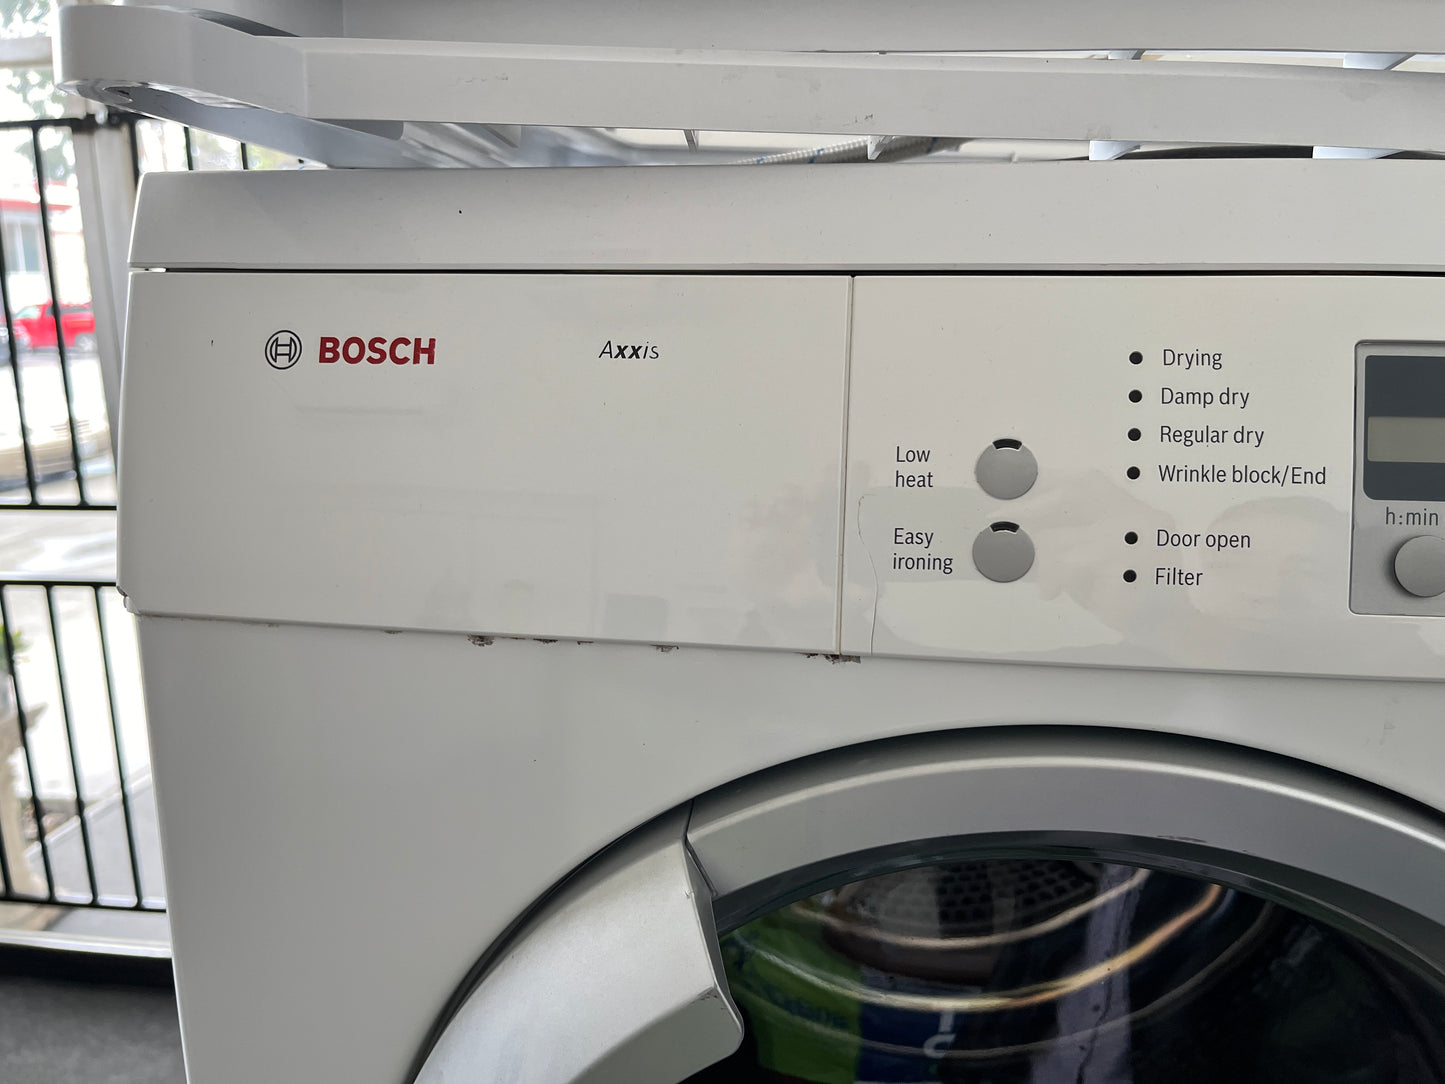 Bosch Axxis WAS20160UC 24 Inch Front-Load Washer 2.2 cu. ft., 15 Wash Programs, Touch Controls 1,000 RPM Spin Speed, Bosch Axxis  WTE86300US 24 Inch Ventless Electric Dryer with 3.9 cu. ft., 11 Drying Cycles, 4 Drying Options, LED Anticrease , 369296